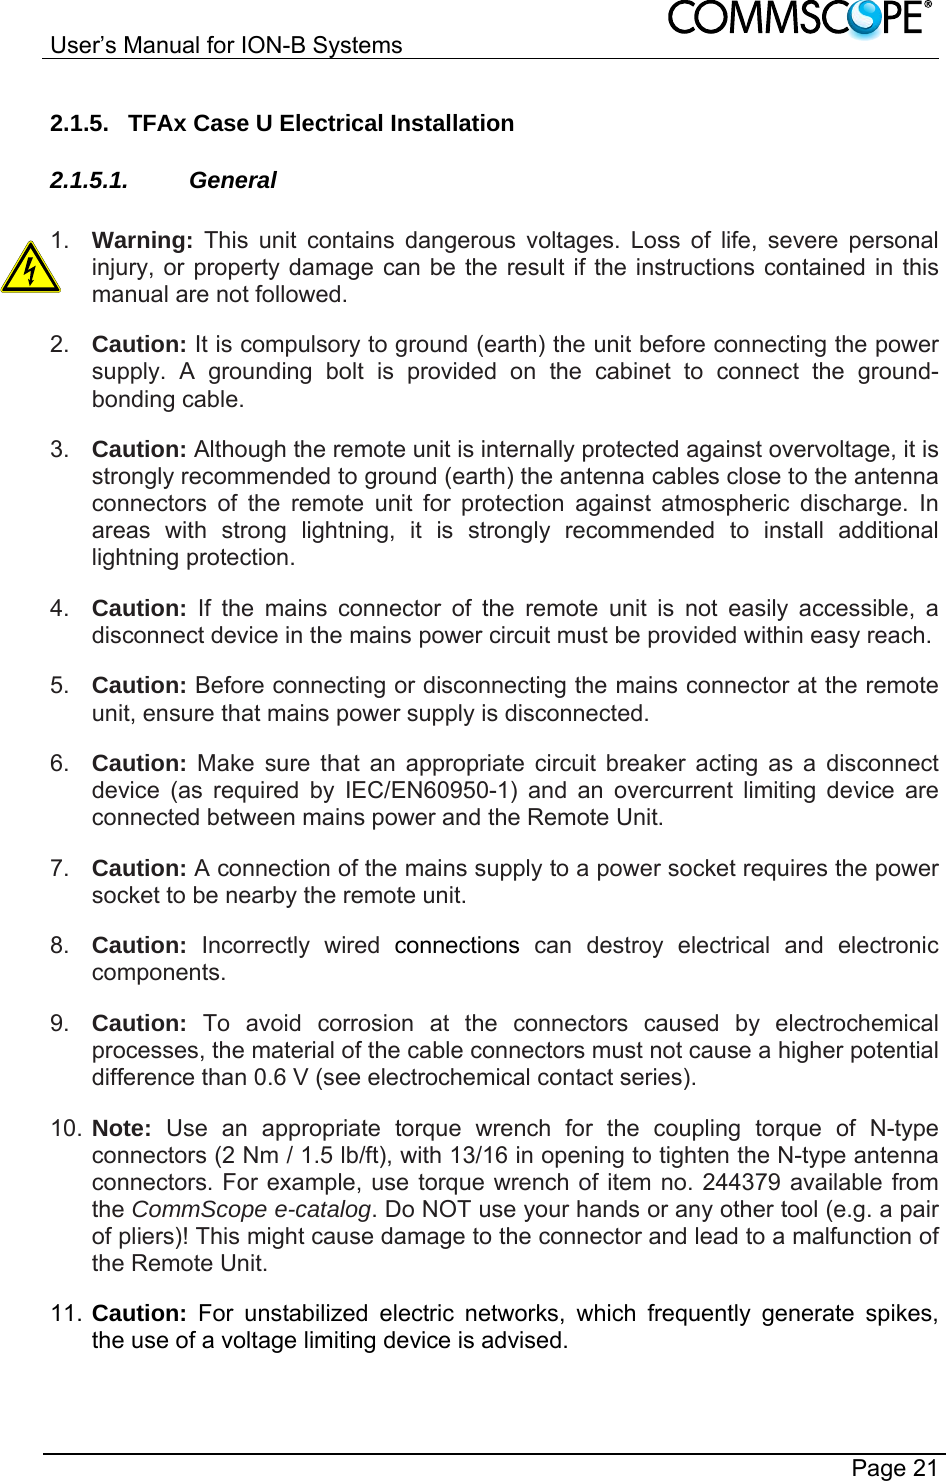 User’s Manual for ION-B Systems       Page 21 2.1.5.  TFAx Case U Electrical Installation 2.1.5.1. General  1.  Warning:  This unit contains dangerous voltages. Loss of life, severe personal injury, or property damage can be the result if the instructions contained in this manual are not followed. 2.  Caution: It is compulsory to ground (earth) the unit before connecting the power supply. A grounding bolt is provided on the cabinet to connect the ground-bonding cable. 3.  Caution: Although the remote unit is internally protected against overvoltage, it is strongly recommended to ground (earth) the antenna cables close to the antenna connectors of the remote unit for protection against atmospheric discharge. In areas with strong lightning, it is strongly recommended to install additional lightning protection. 4.  Caution: If the mains connector of the remote unit is not easily accessible, a disconnect device in the mains power circuit must be provided within easy reach. 5.  Caution: Before connecting or disconnecting the mains connector at the remote unit, ensure that mains power supply is disconnected. 6.  Caution: Make sure that an appropriate circuit breaker acting as a disconnect device (as required by IEC/EN60950-1) and an overcurrent limiting device are connected between mains power and the Remote Unit. 7.  Caution: A connection of the mains supply to a power socket requires the power socket to be nearby the remote unit. 8.  Caution: Incorrectly wired connections can destroy electrical and electronic components. 9.  Caution: To avoid corrosion at the connectors caused by electrochemical processes, the material of the cable connectors must not cause a higher potential difference than 0.6 V (see electrochemical contact series). 10. Note:  Use an appropriate torque wrench for the coupling torque of N-type connectors (2 Nm / 1.5 lb/ft), with 13/16 in opening to tighten the N-type antenna connectors. For example, use torque wrench of item no. 244379 available from the CommScope e-catalog. Do NOT use your hands or any other tool (e.g. a pair of pliers)! This might cause damage to the connector and lead to a malfunction of the Remote Unit. 11. Caution:  For unstabilized electric networks, which frequently generate spikes, the use of a voltage limiting device is advised. 